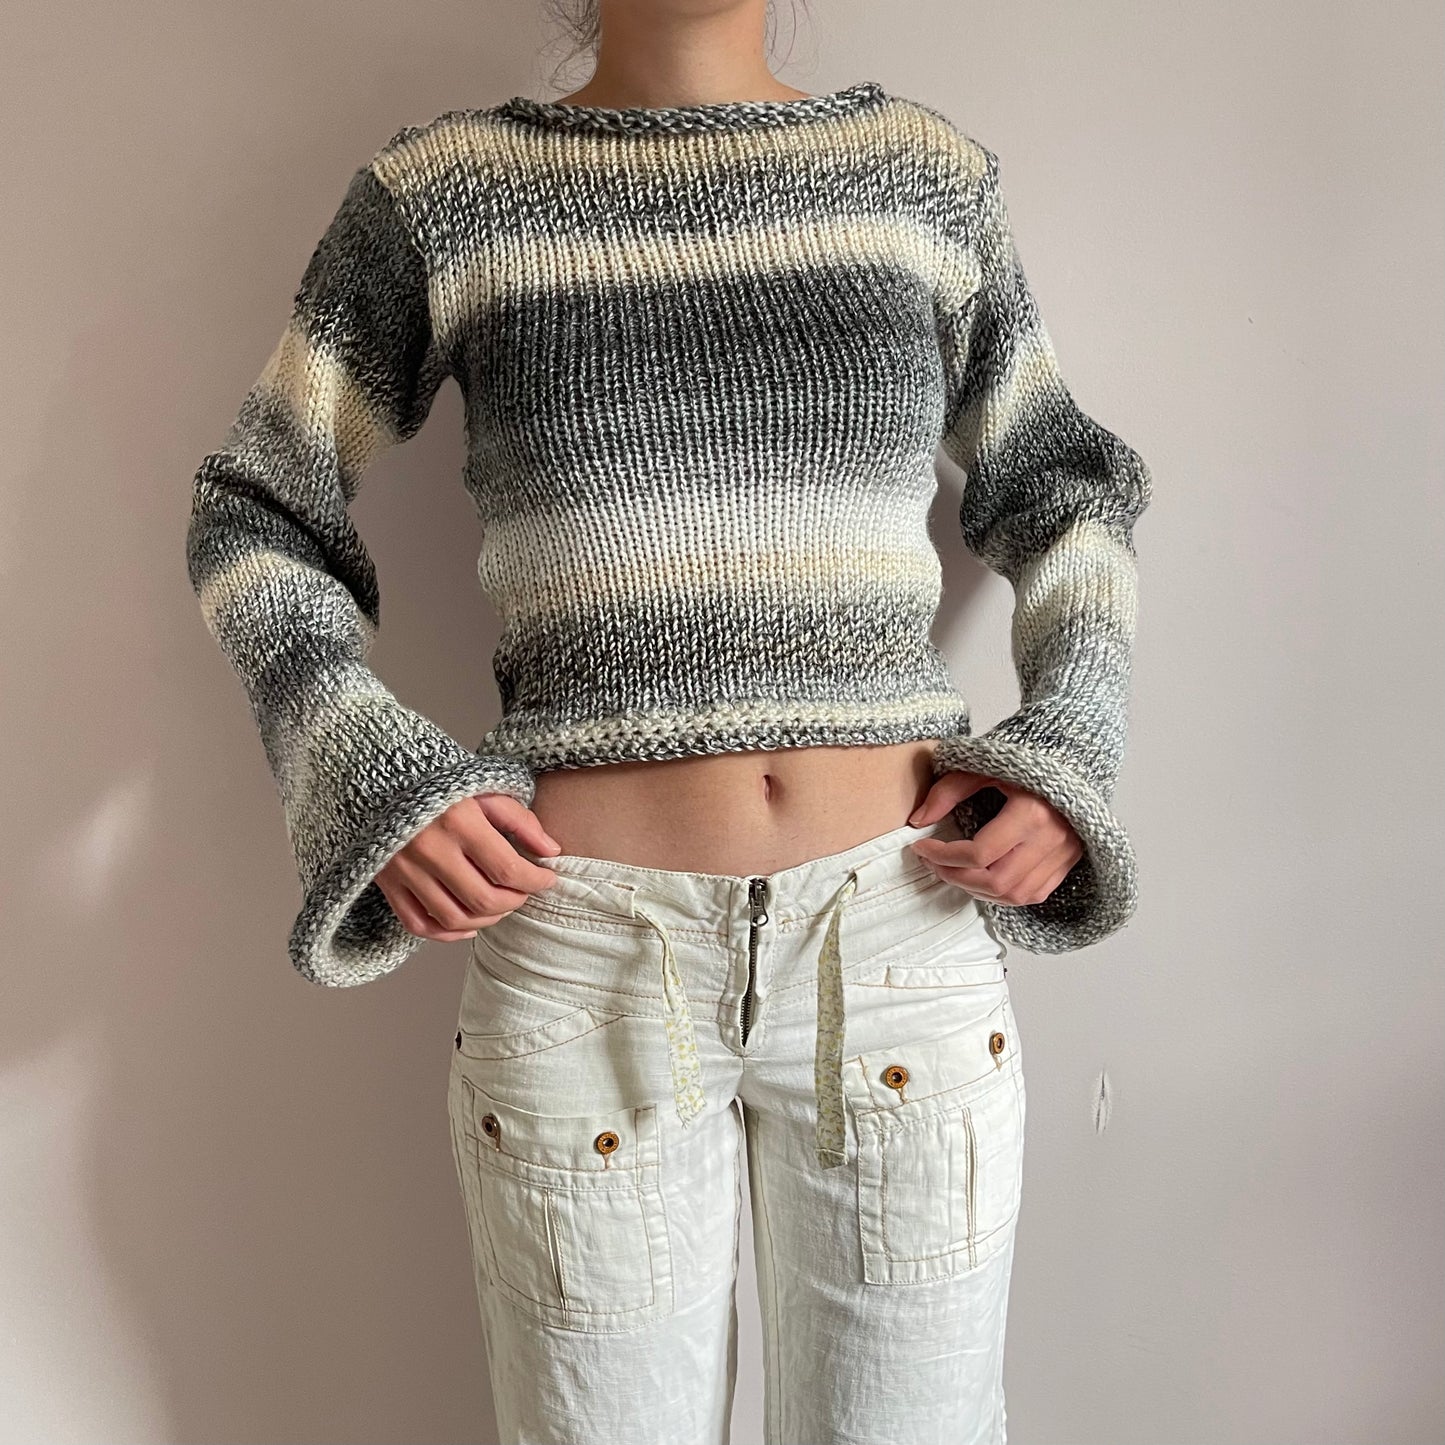 Handmade grey, beige and cream ombré knitted jumper